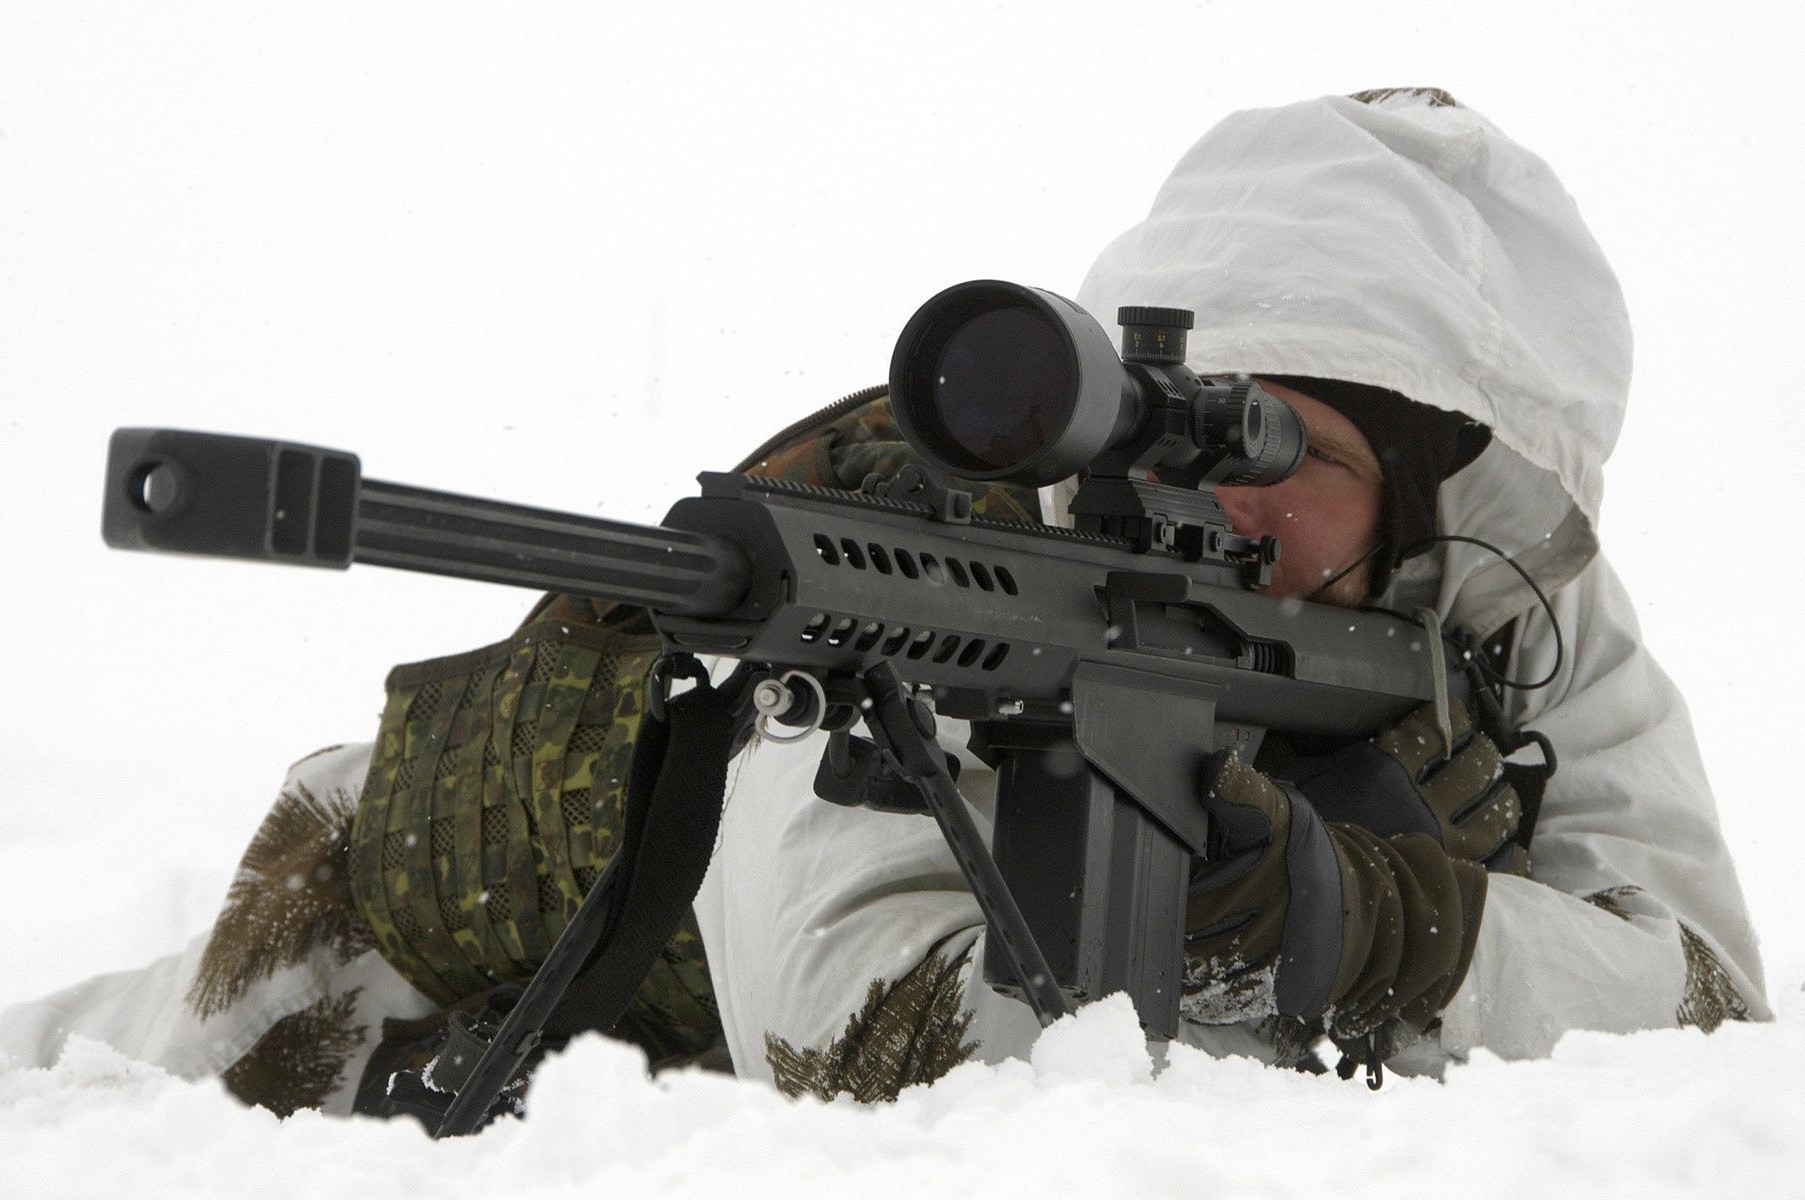 swat gun weapon army war rifle military ammunition soldier protection one force special sniper security camouflage pistol battle police snow danger